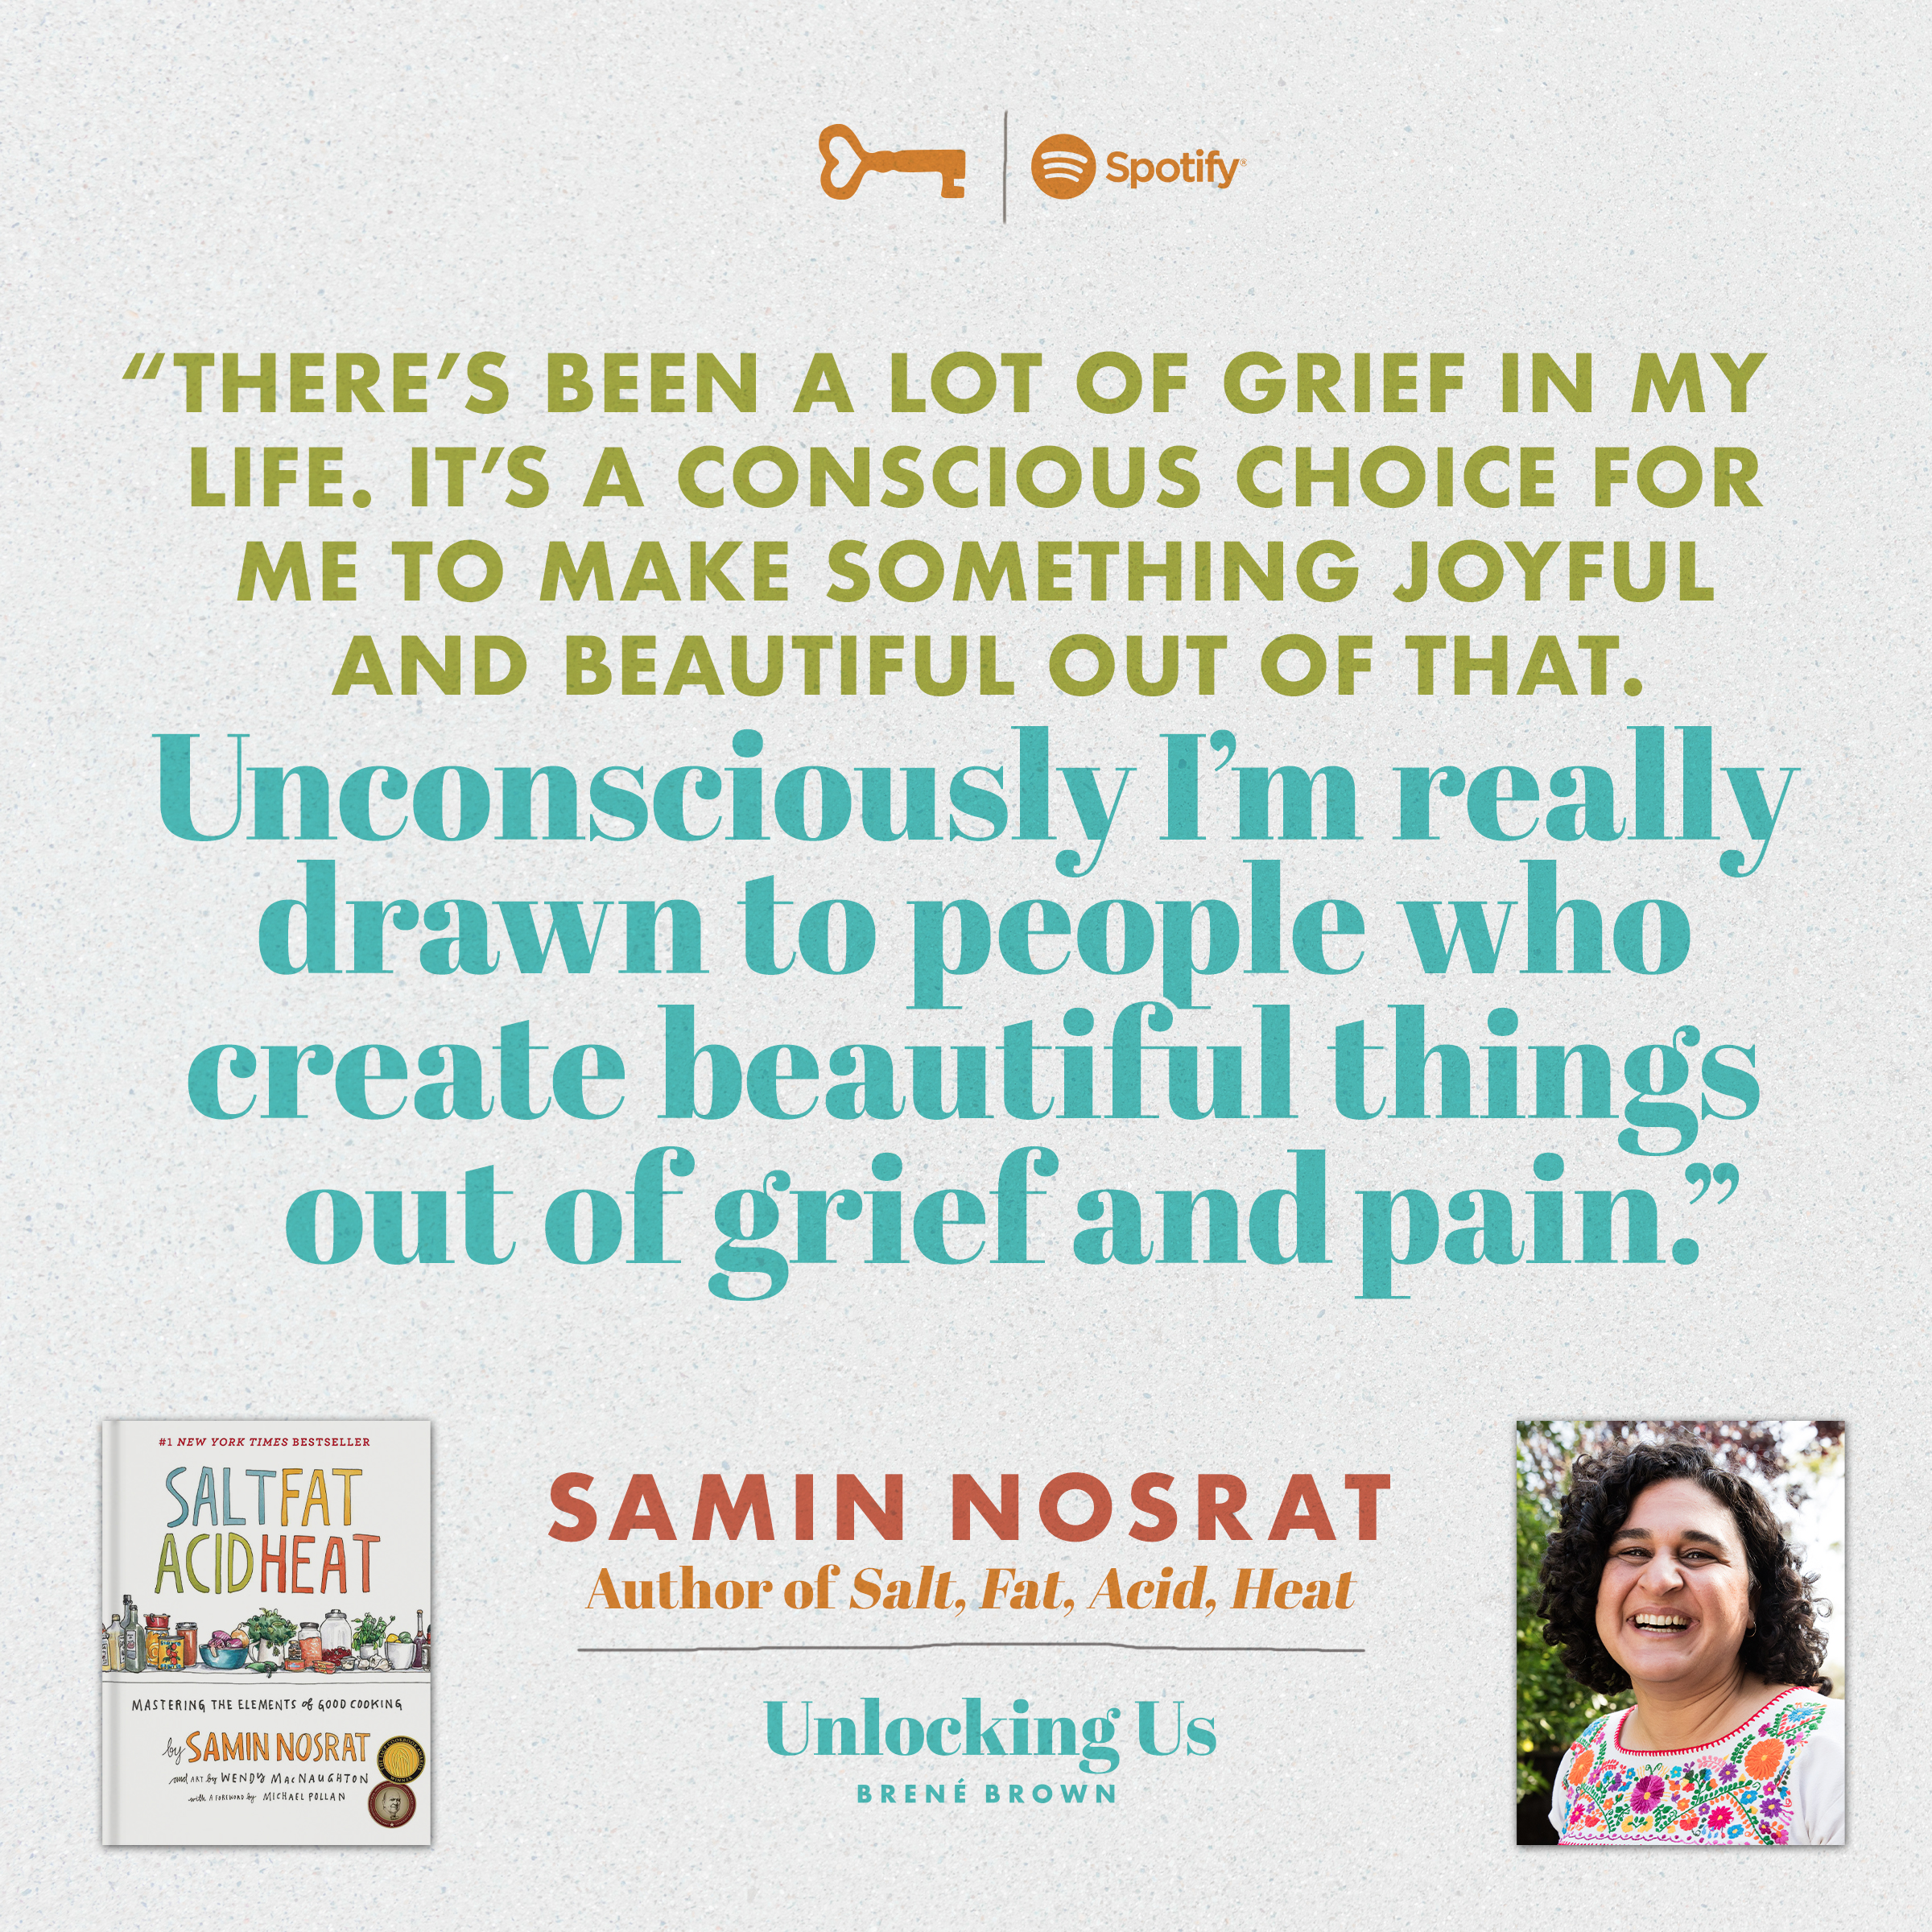 There's been a lot of grief in my life. It's a conscious choice for me to make something joyful and beautiful out of that. -Samin Nosrat